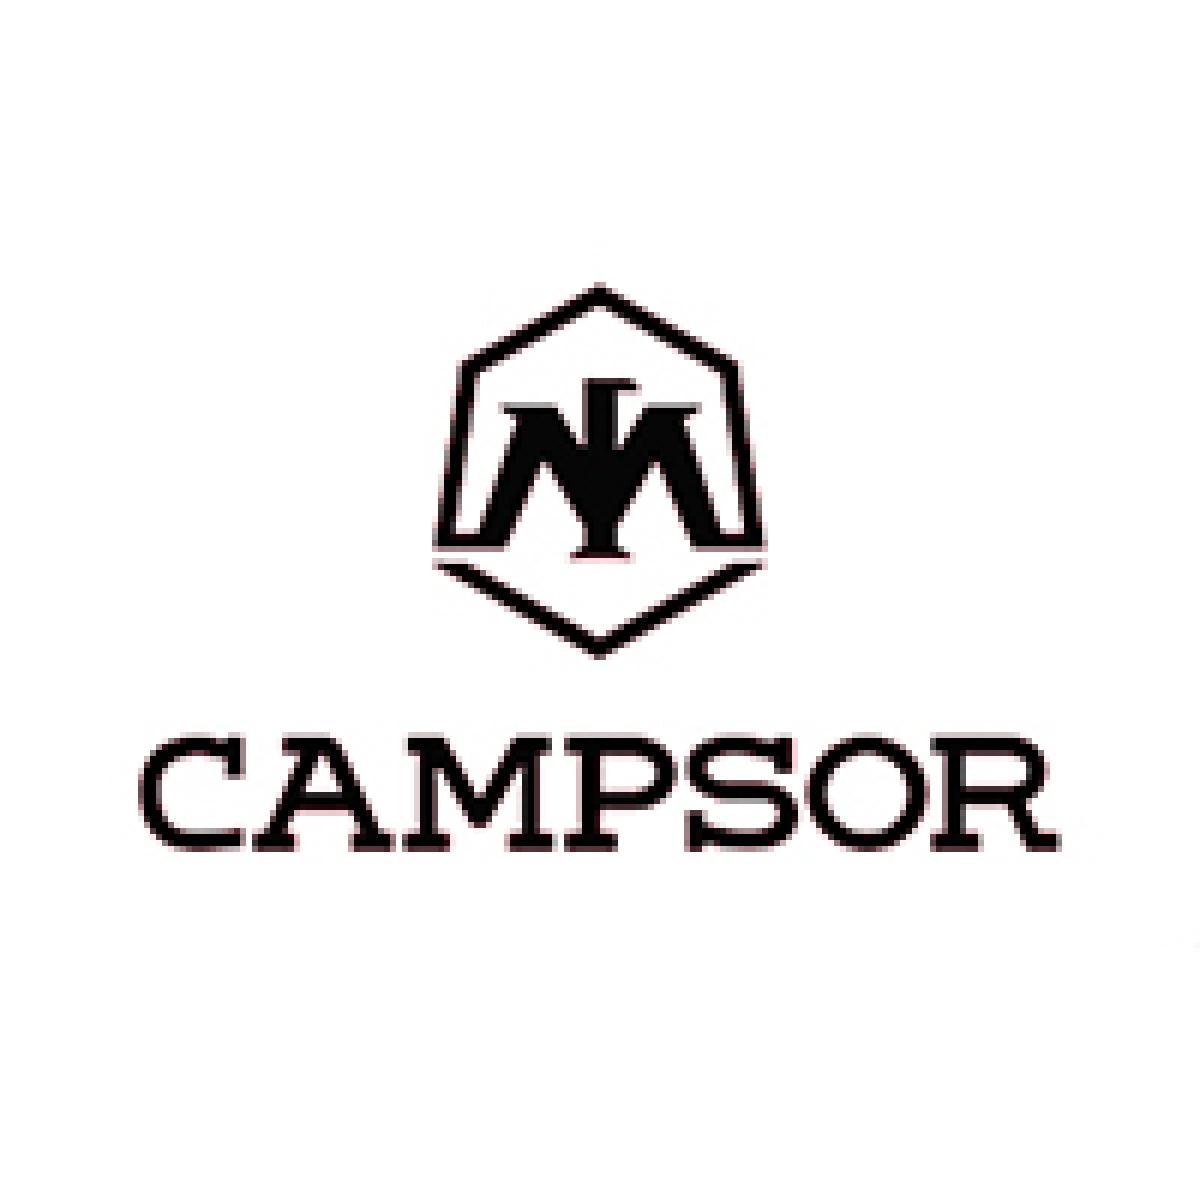 Campsor